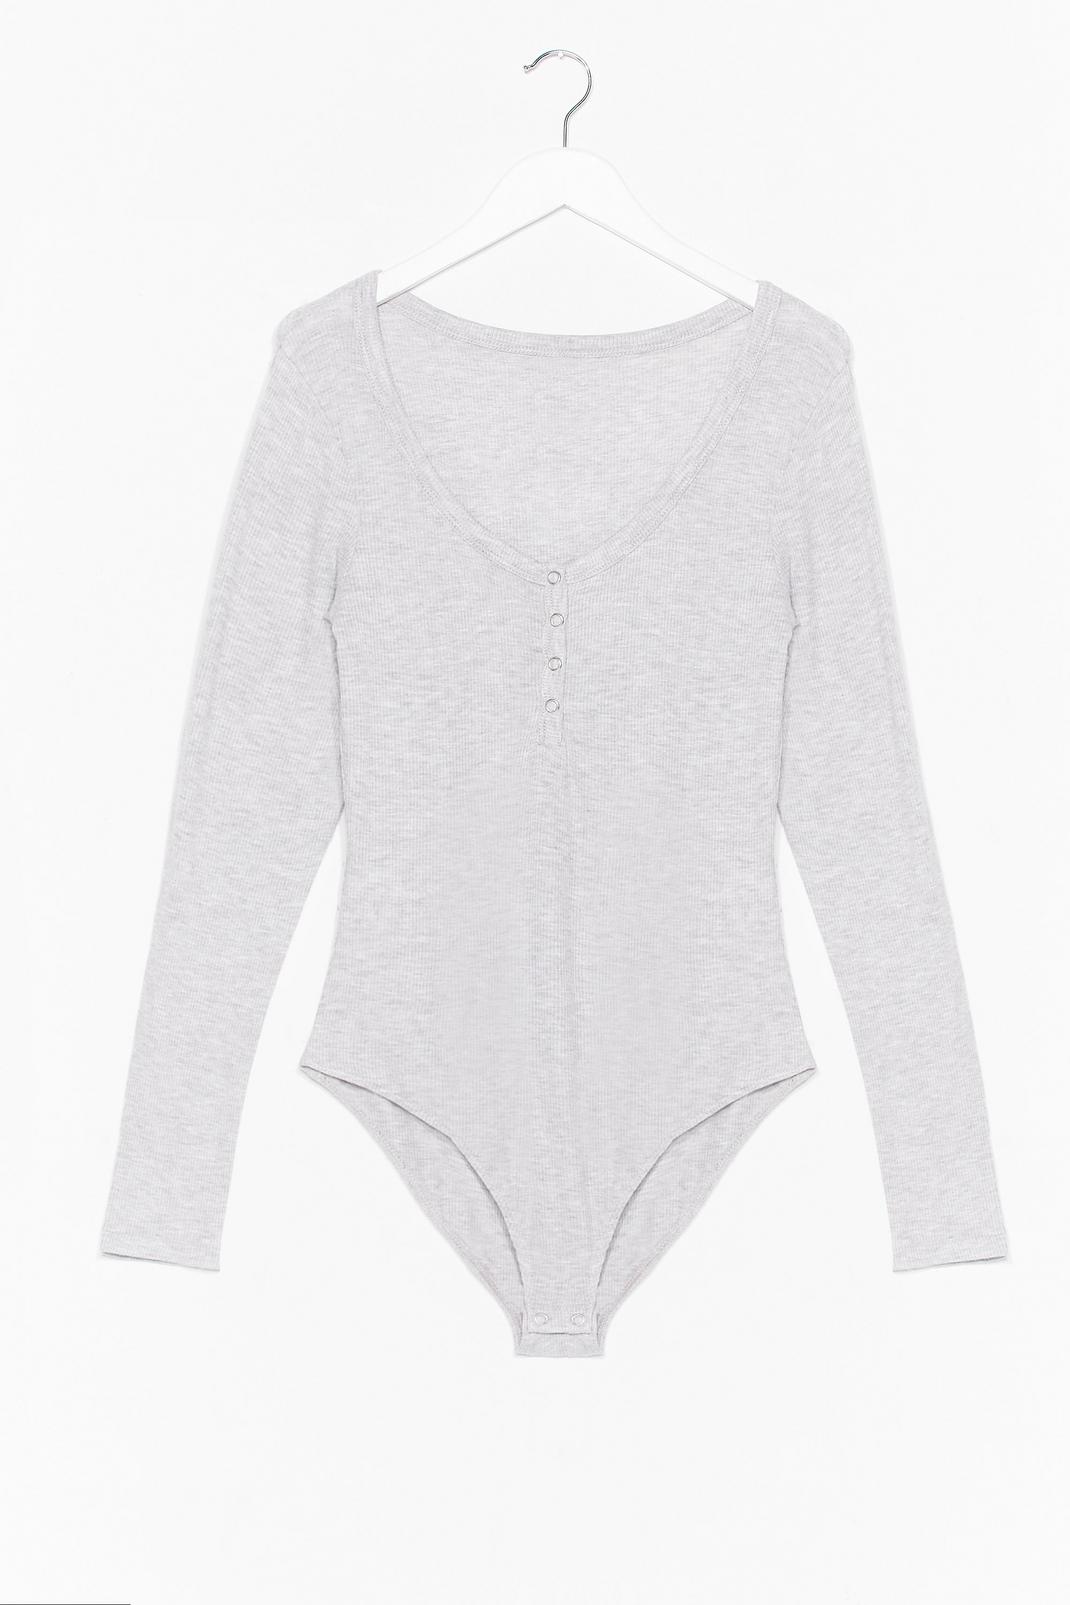 Grey marl We Know the Scoop Ribbed Button-Down Bodysuit image number 1